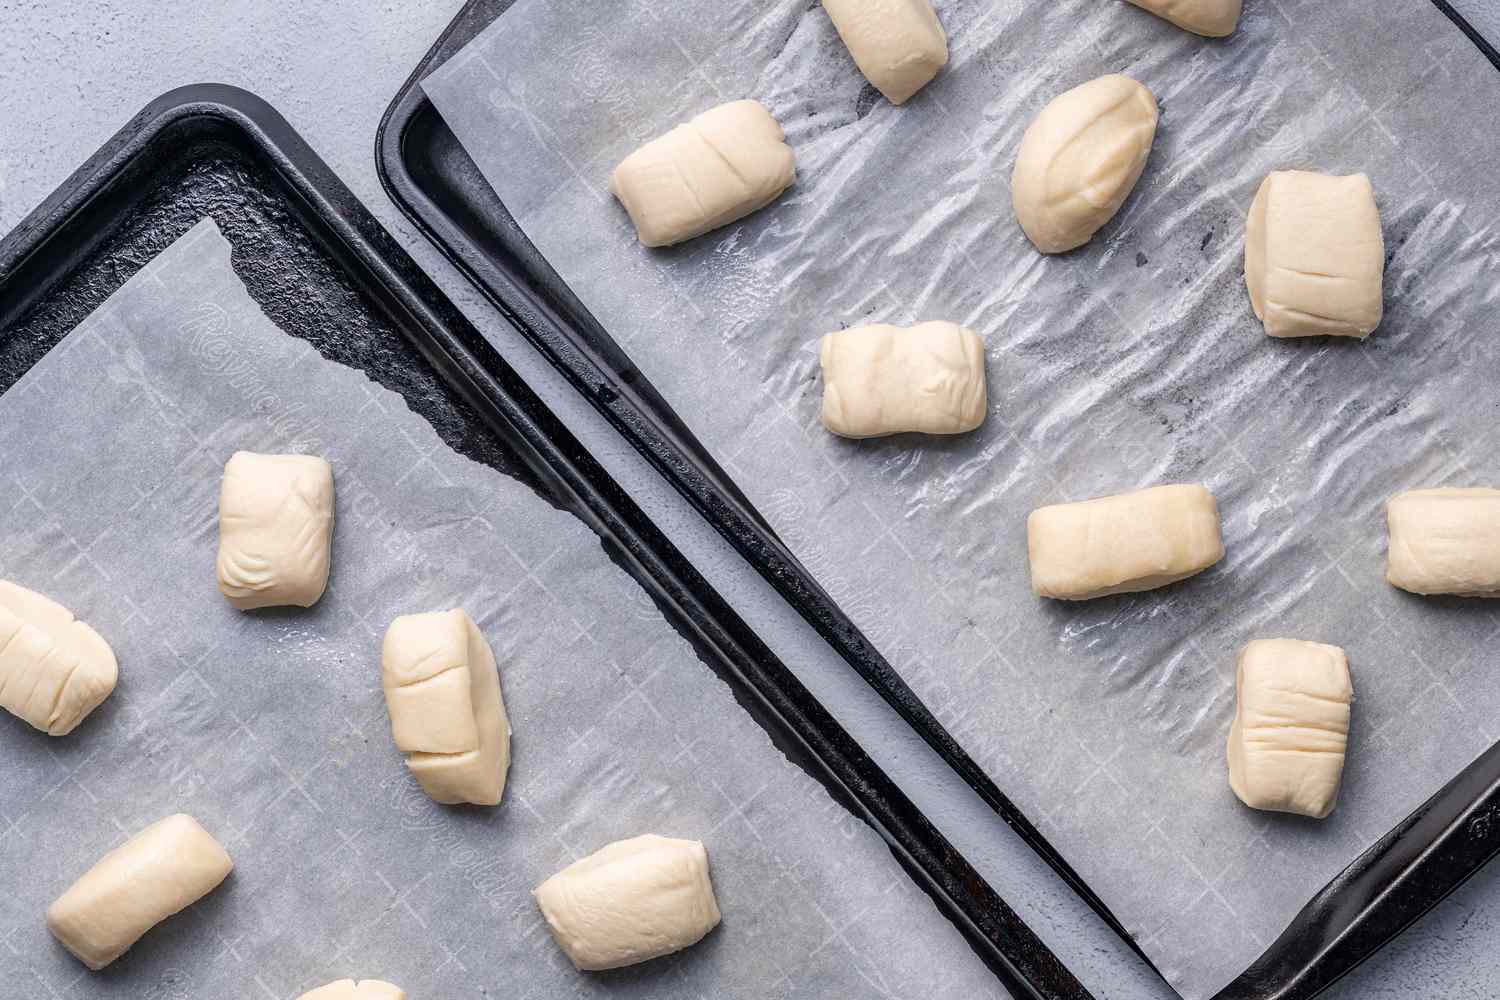 Pieces of boiled dough on parchment paper-lined baking sheets